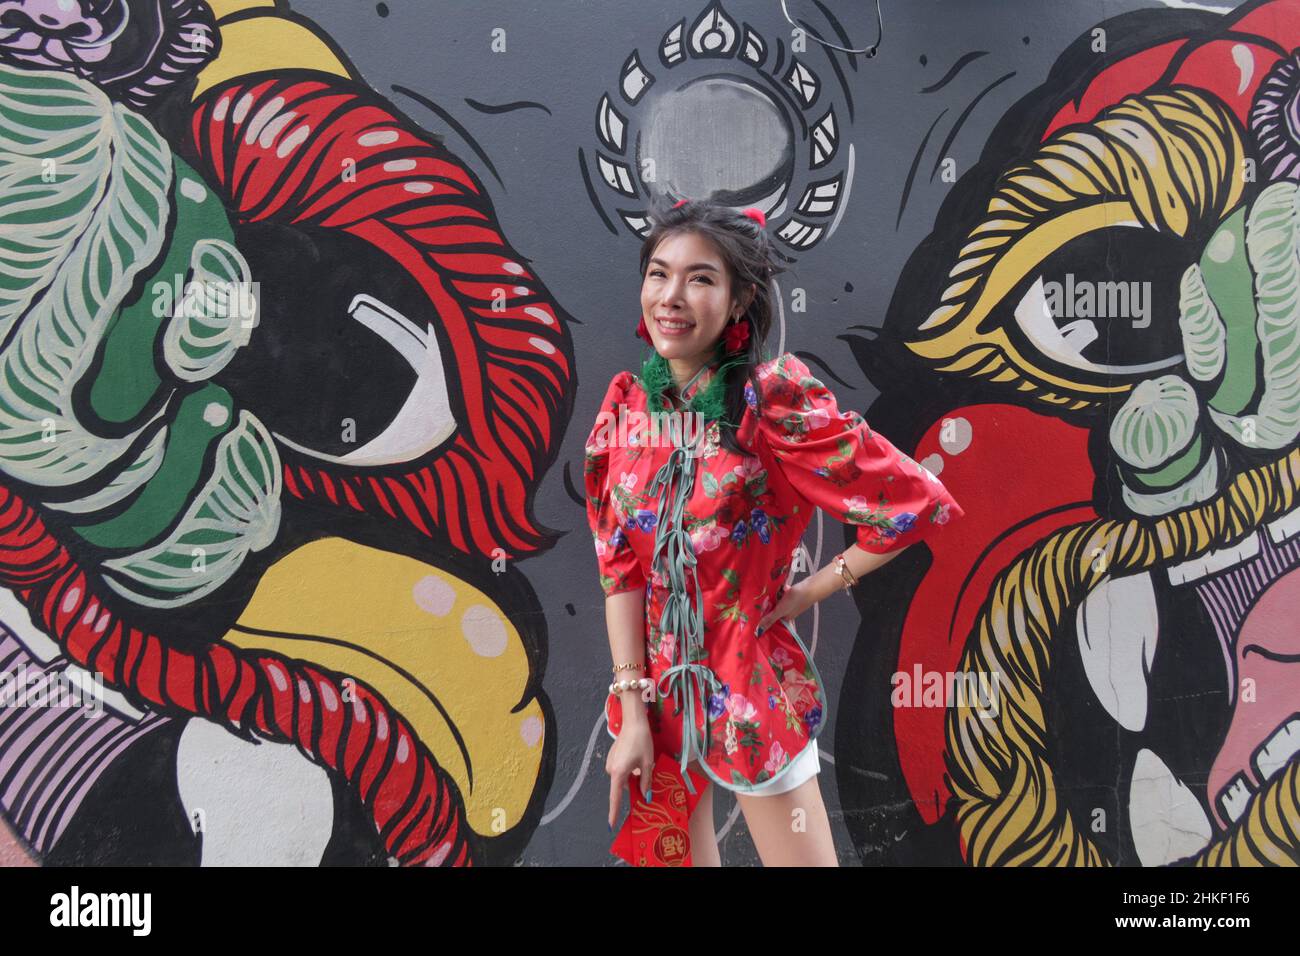 Young Thai Woman wears a traditional Chinese dress (cheongsam) and smiles for the camera  in front of a mural, Chinatown, Bangkok, Thailand Stock Photo